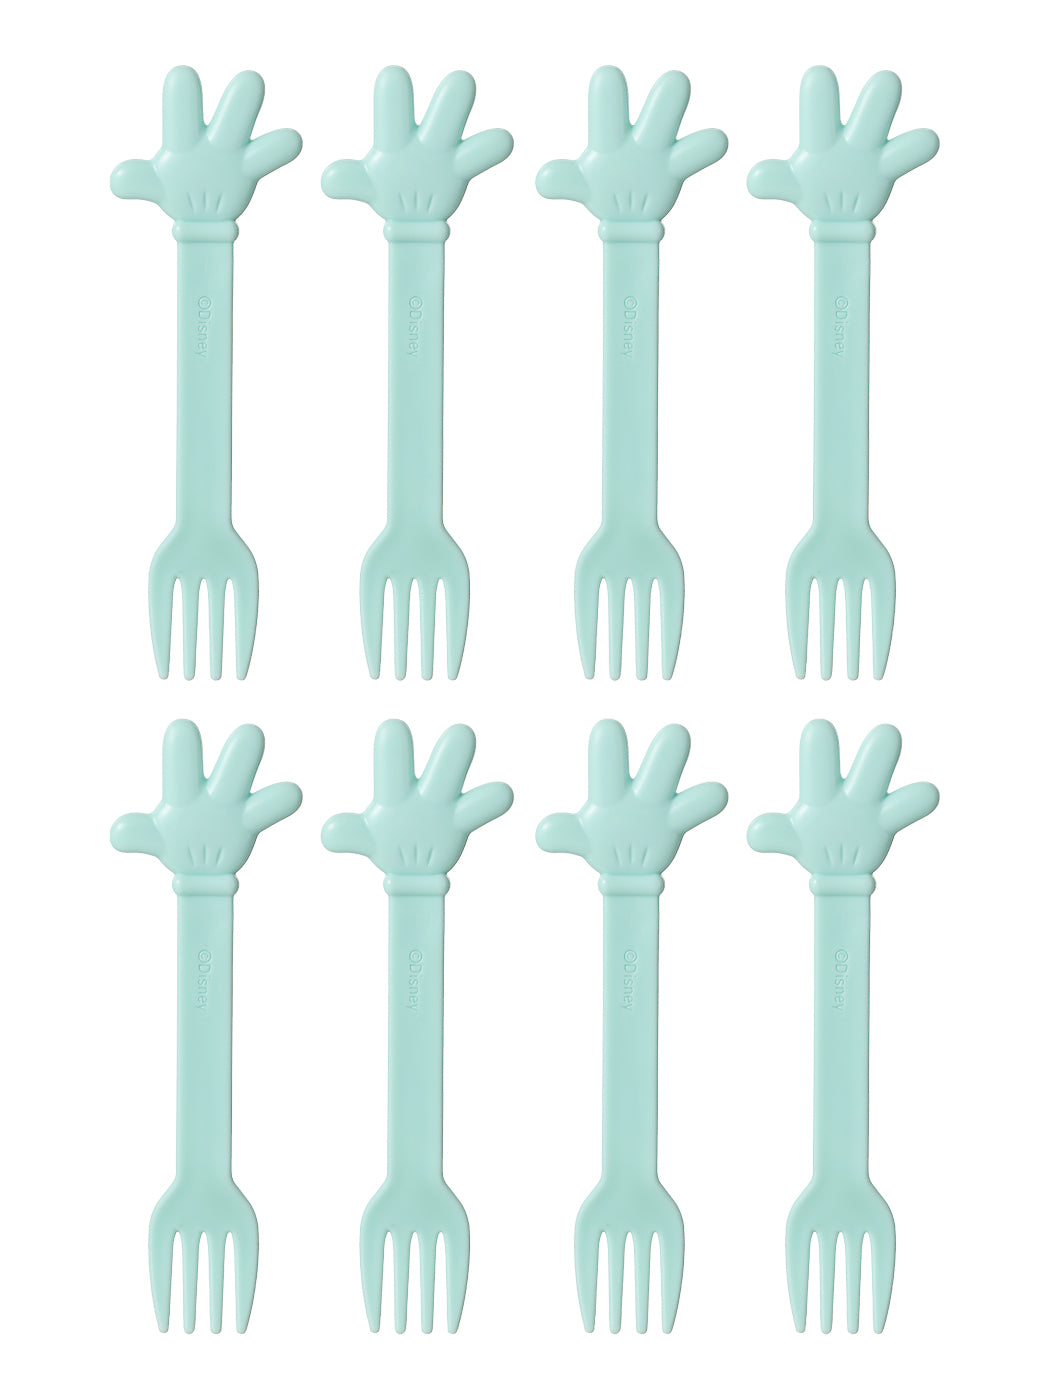 MINISO MICKEY MOUSE COLLECTION 2.0 FORK 8PCS(MICKEY MOUSE) 2010538310104 CUTLERY SET